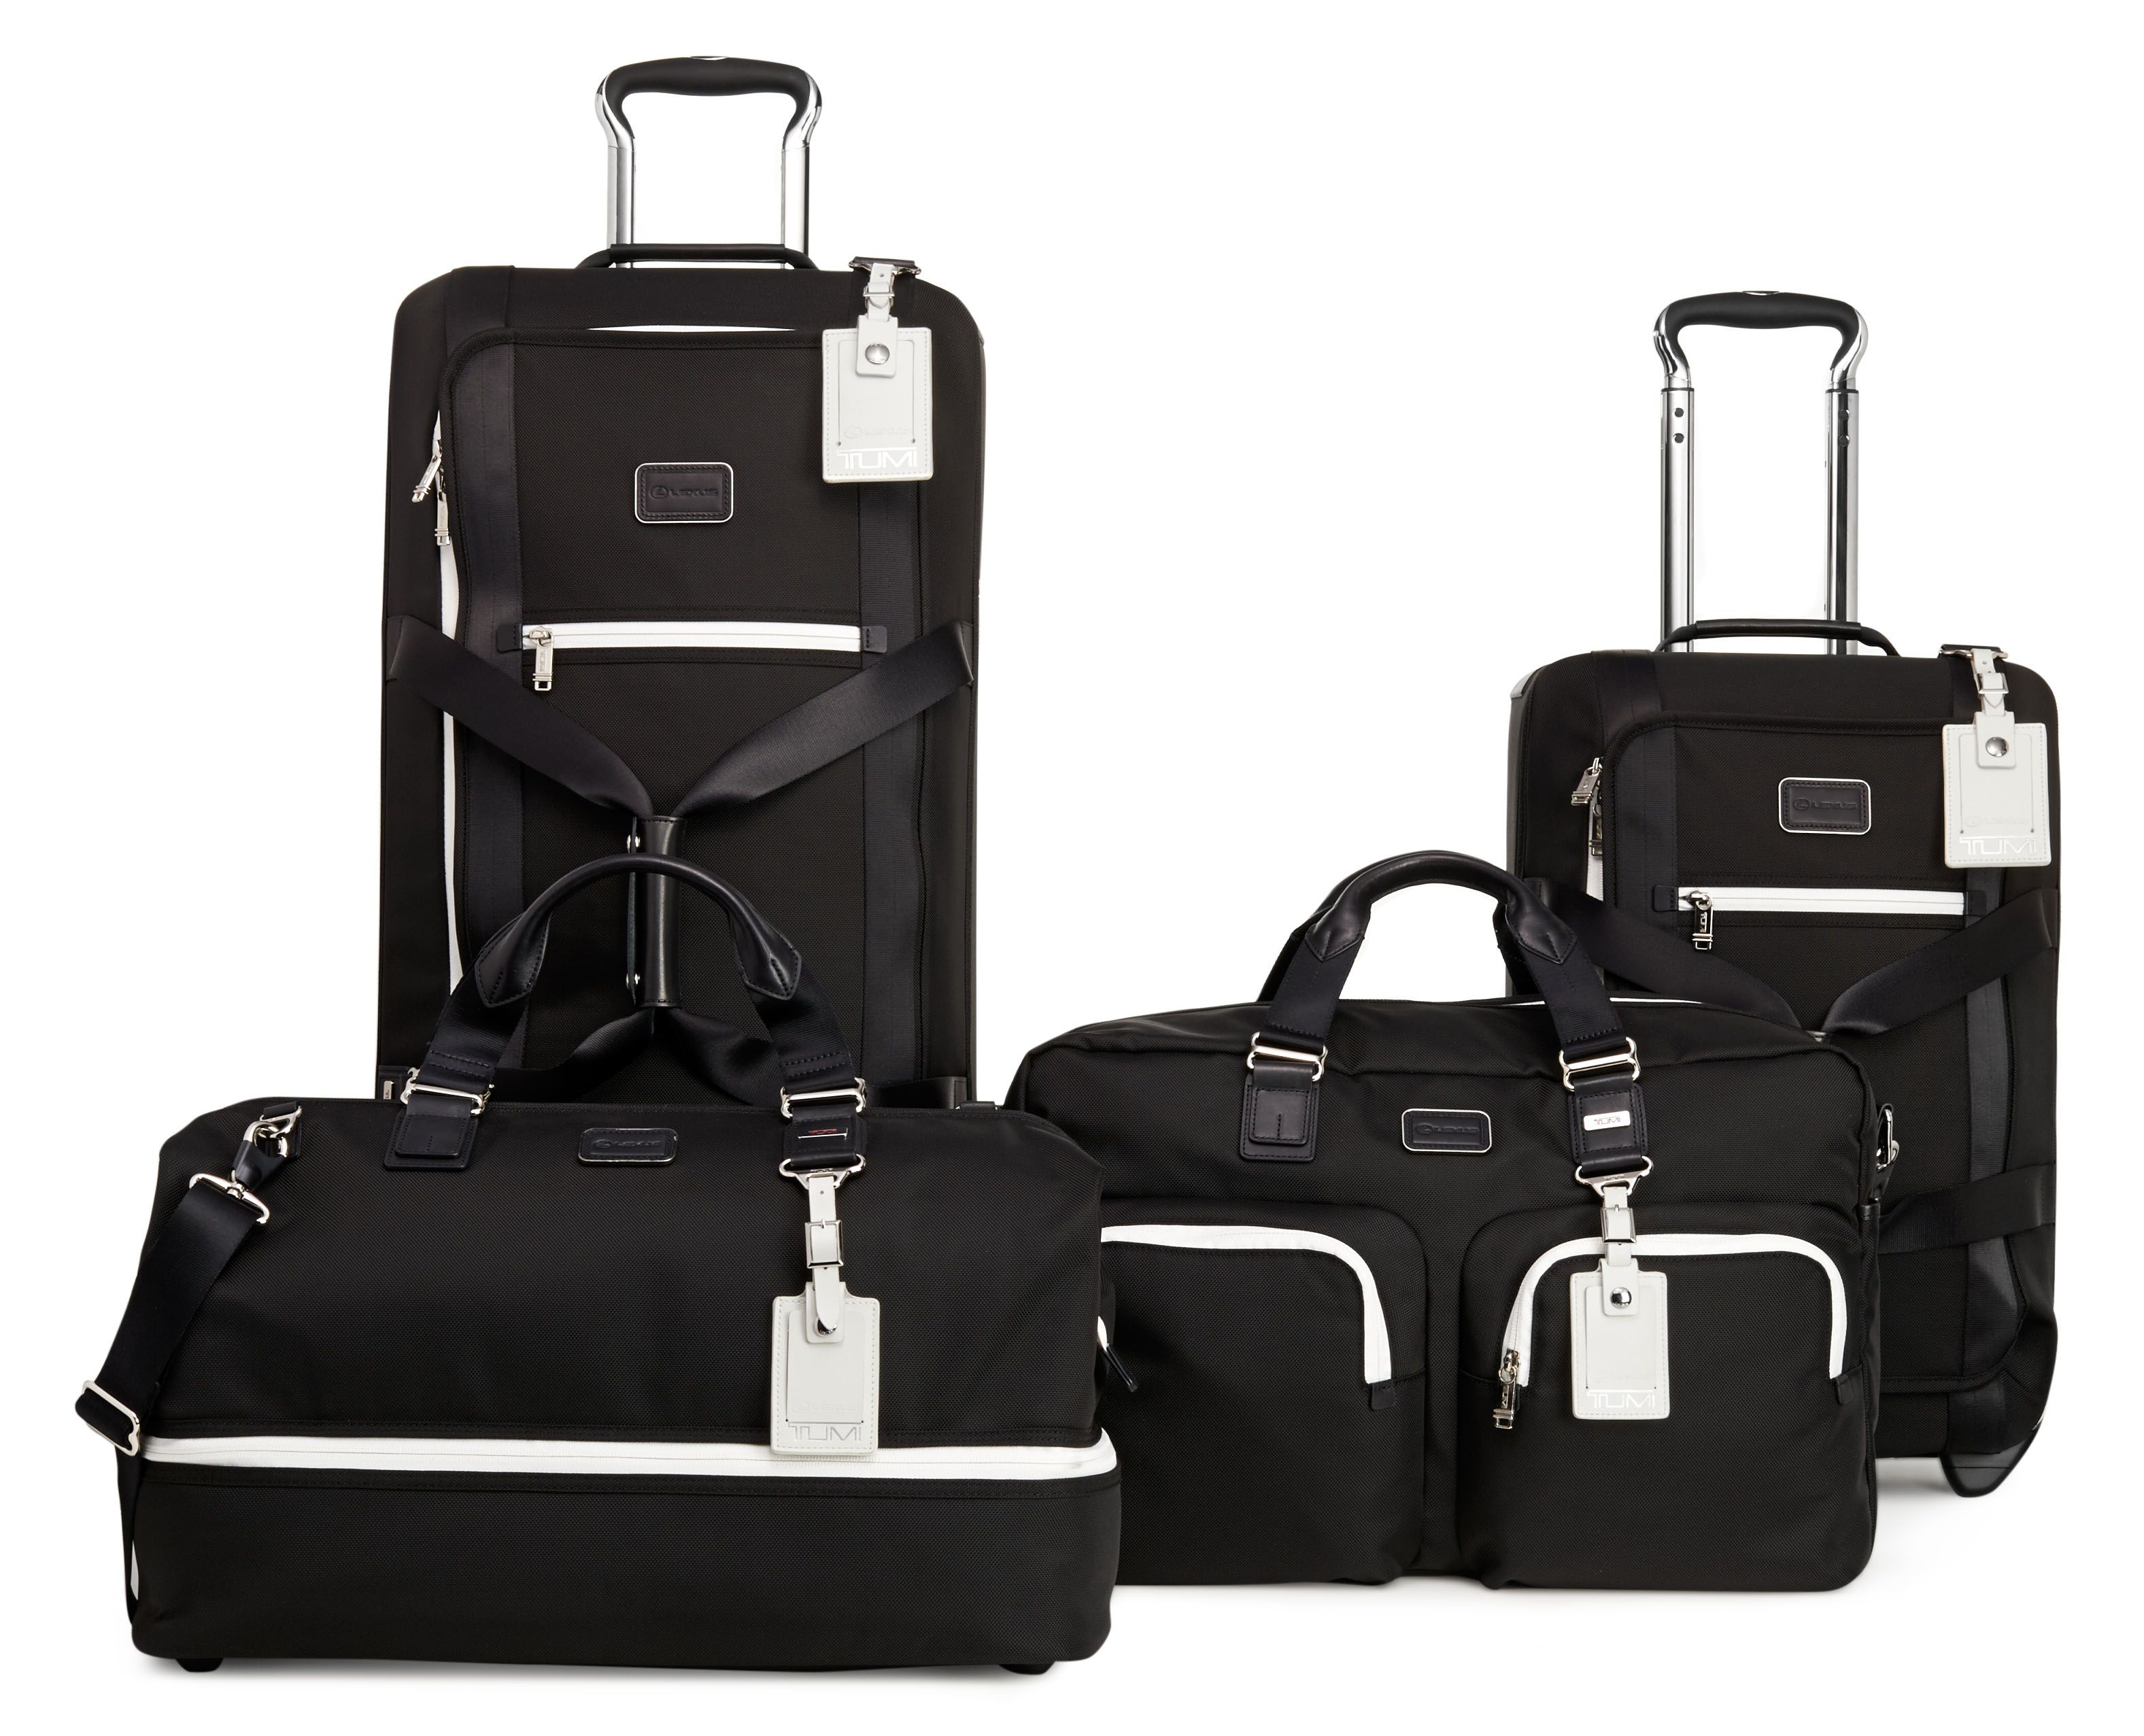 lexus the crafted line tumi luggage